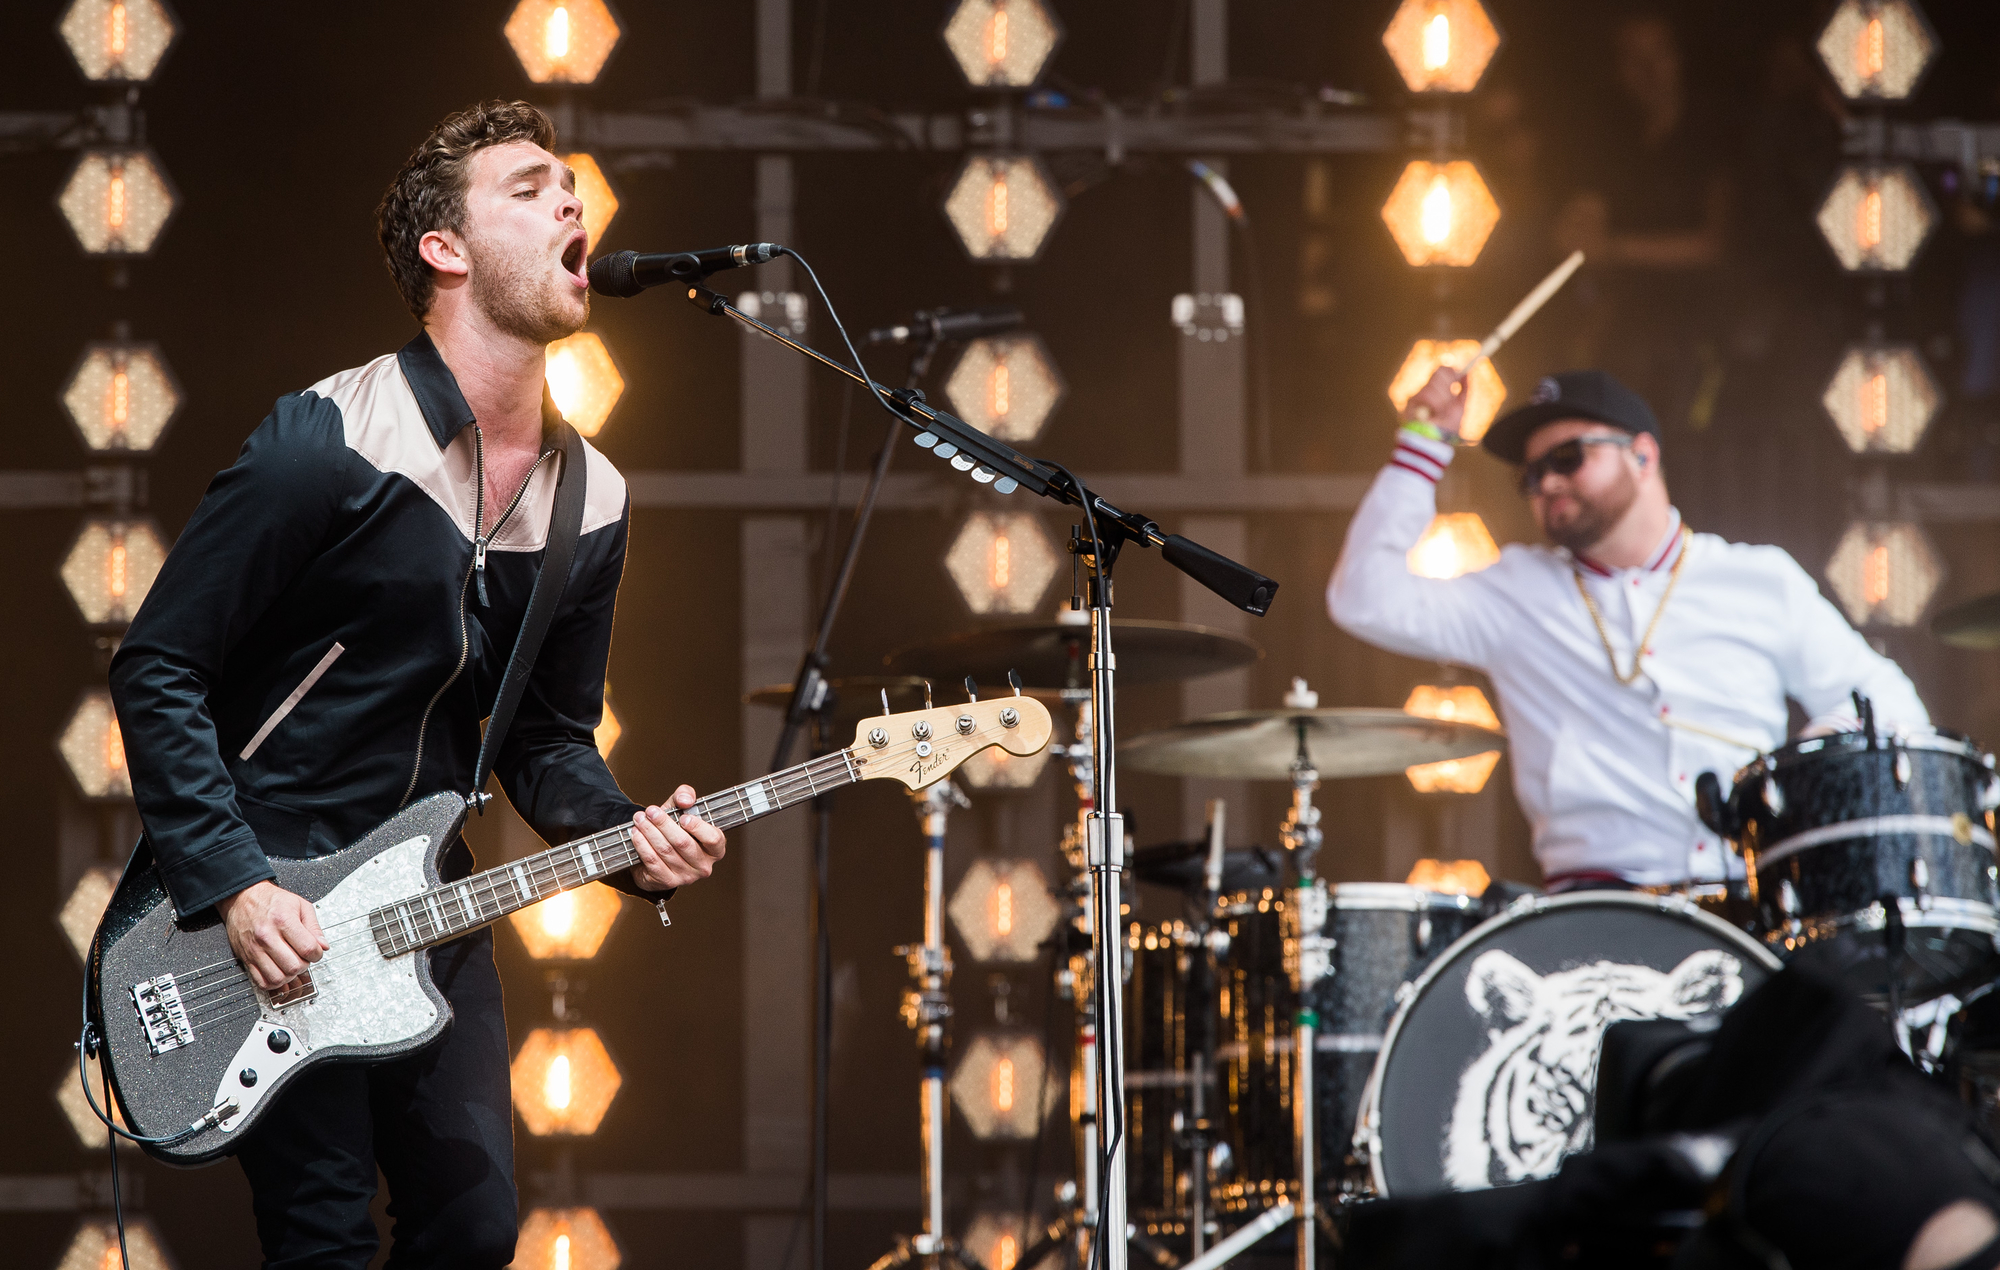 Royal Blood band members performing live on stage, guitarist singing and drummer playing in the background with dynamic lighting, perfect for HD desktop wallpaper.